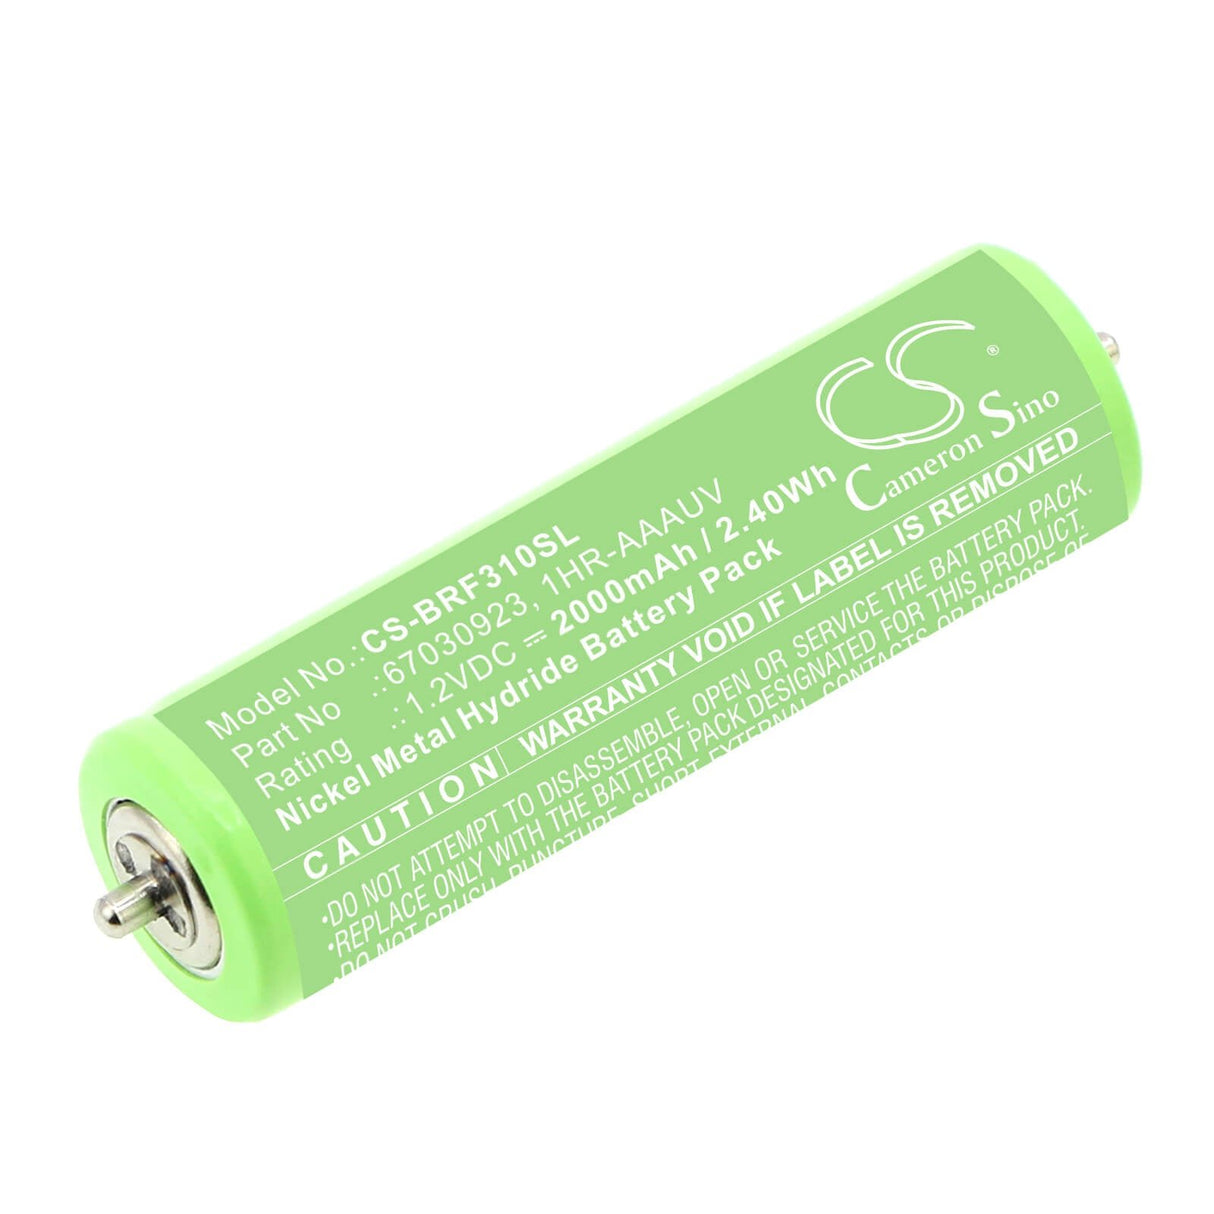 1.2v, Ni-mh, 2000mah, Battery Fits Braun 140, 140 5685 Series 1, 2.40wh Batteries for Electronics Cameron Sino Technology Limited   